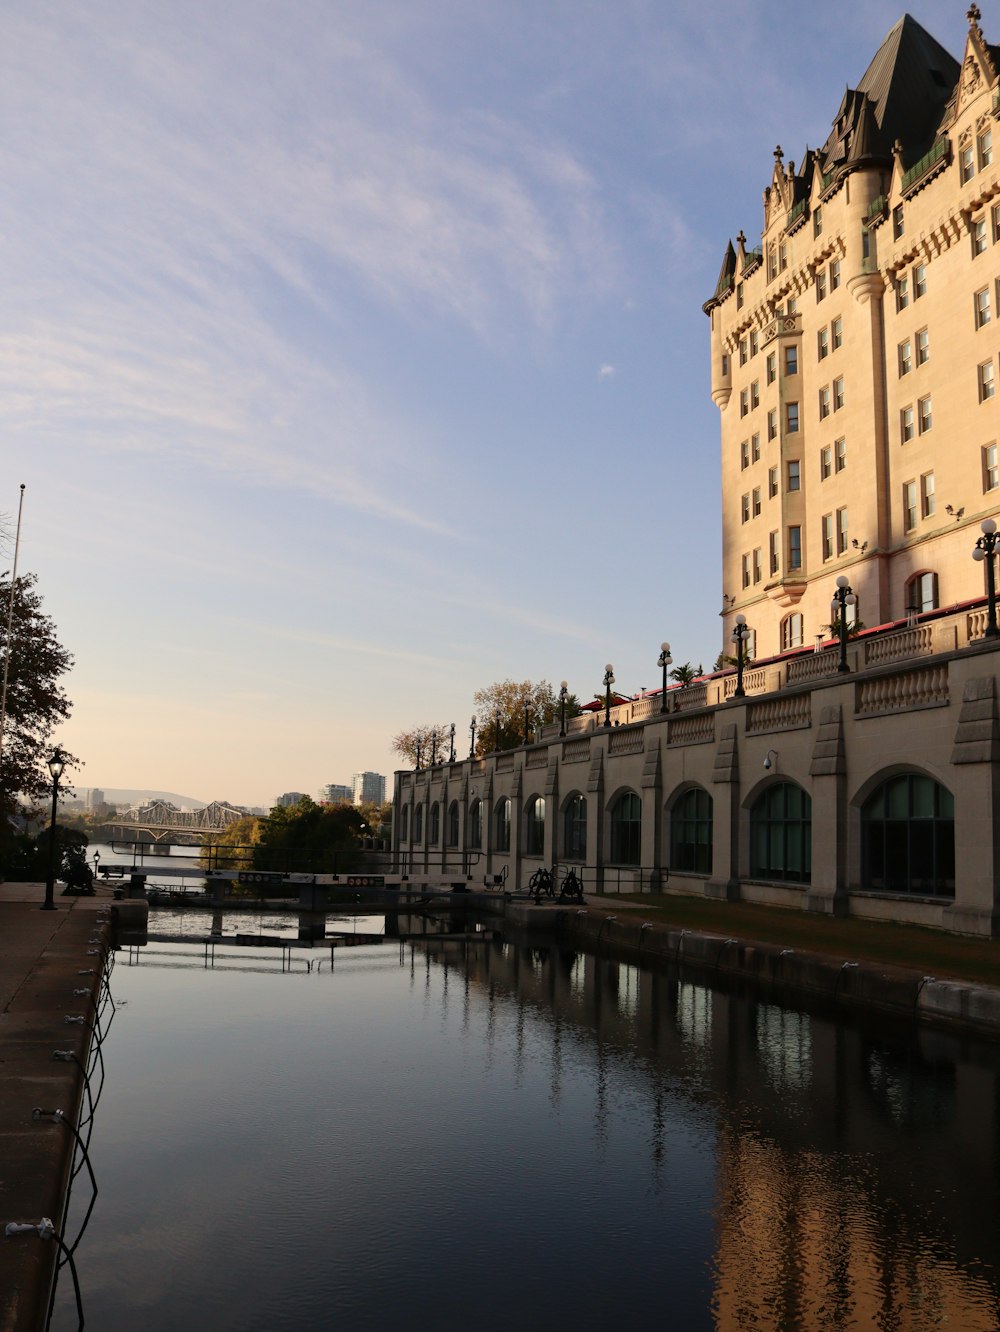 a large building next to a body of water